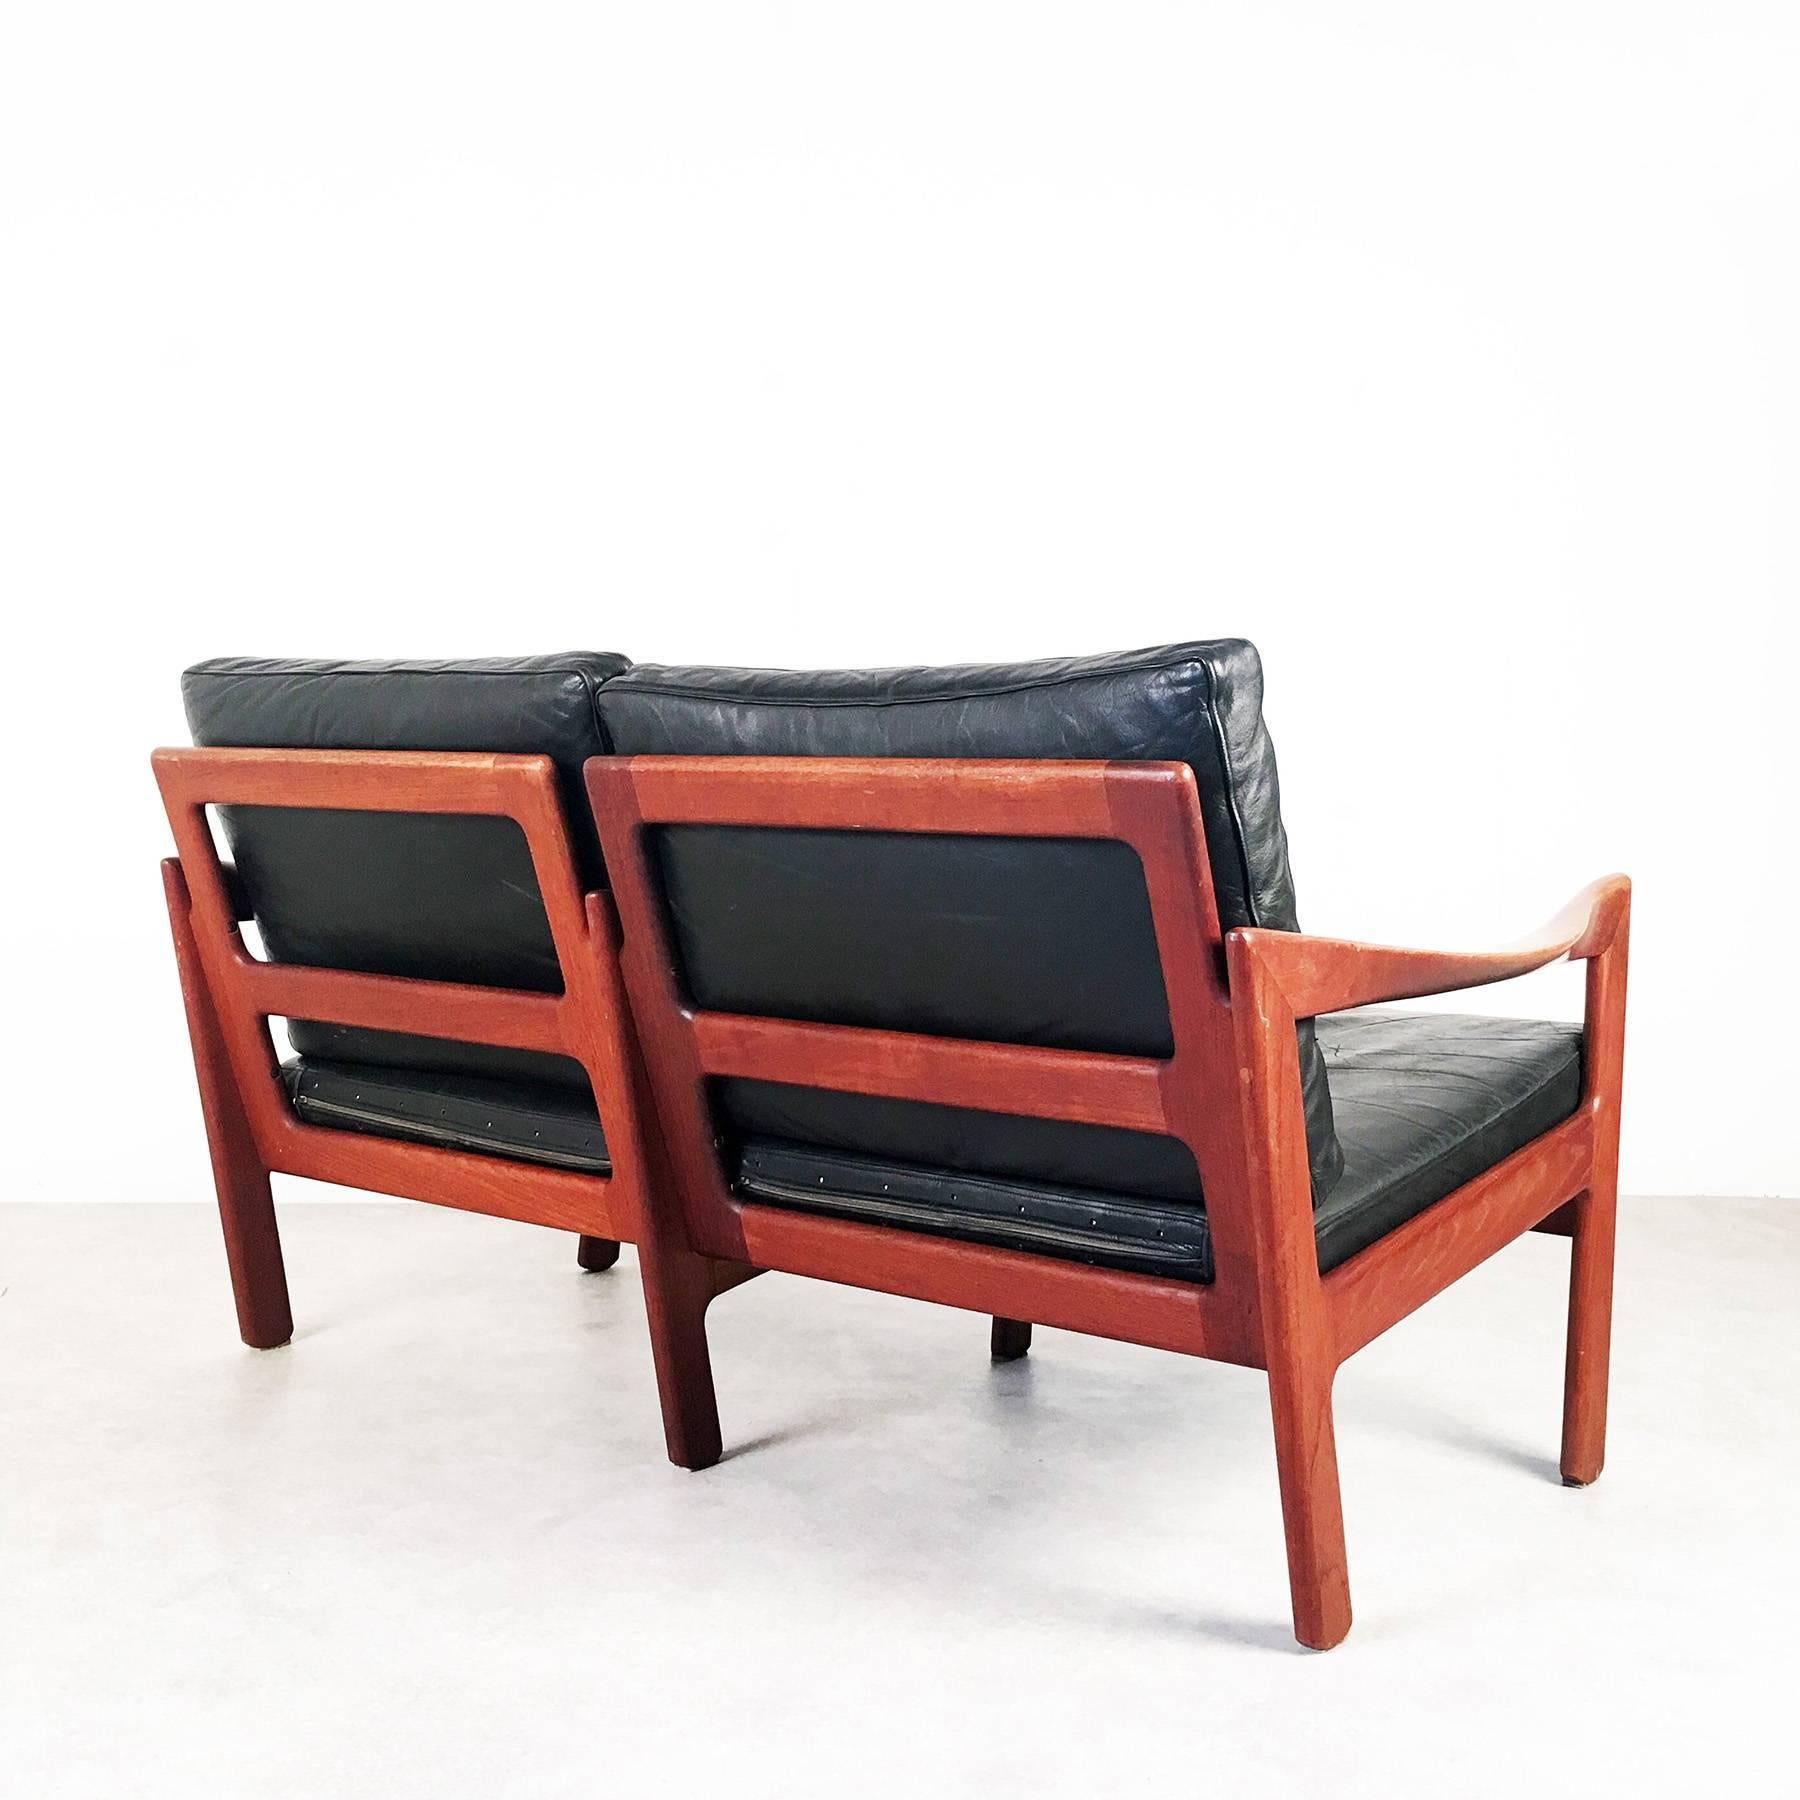 Two-seat sofa, designed in the 1960s by Illum Wikkelsø, manufactured in Denmark by Niels Eilersen. Beautiful model with organically shaped armrests and inclined legs. The sofa is built modularly, which makes it possible to transform a two-seat into